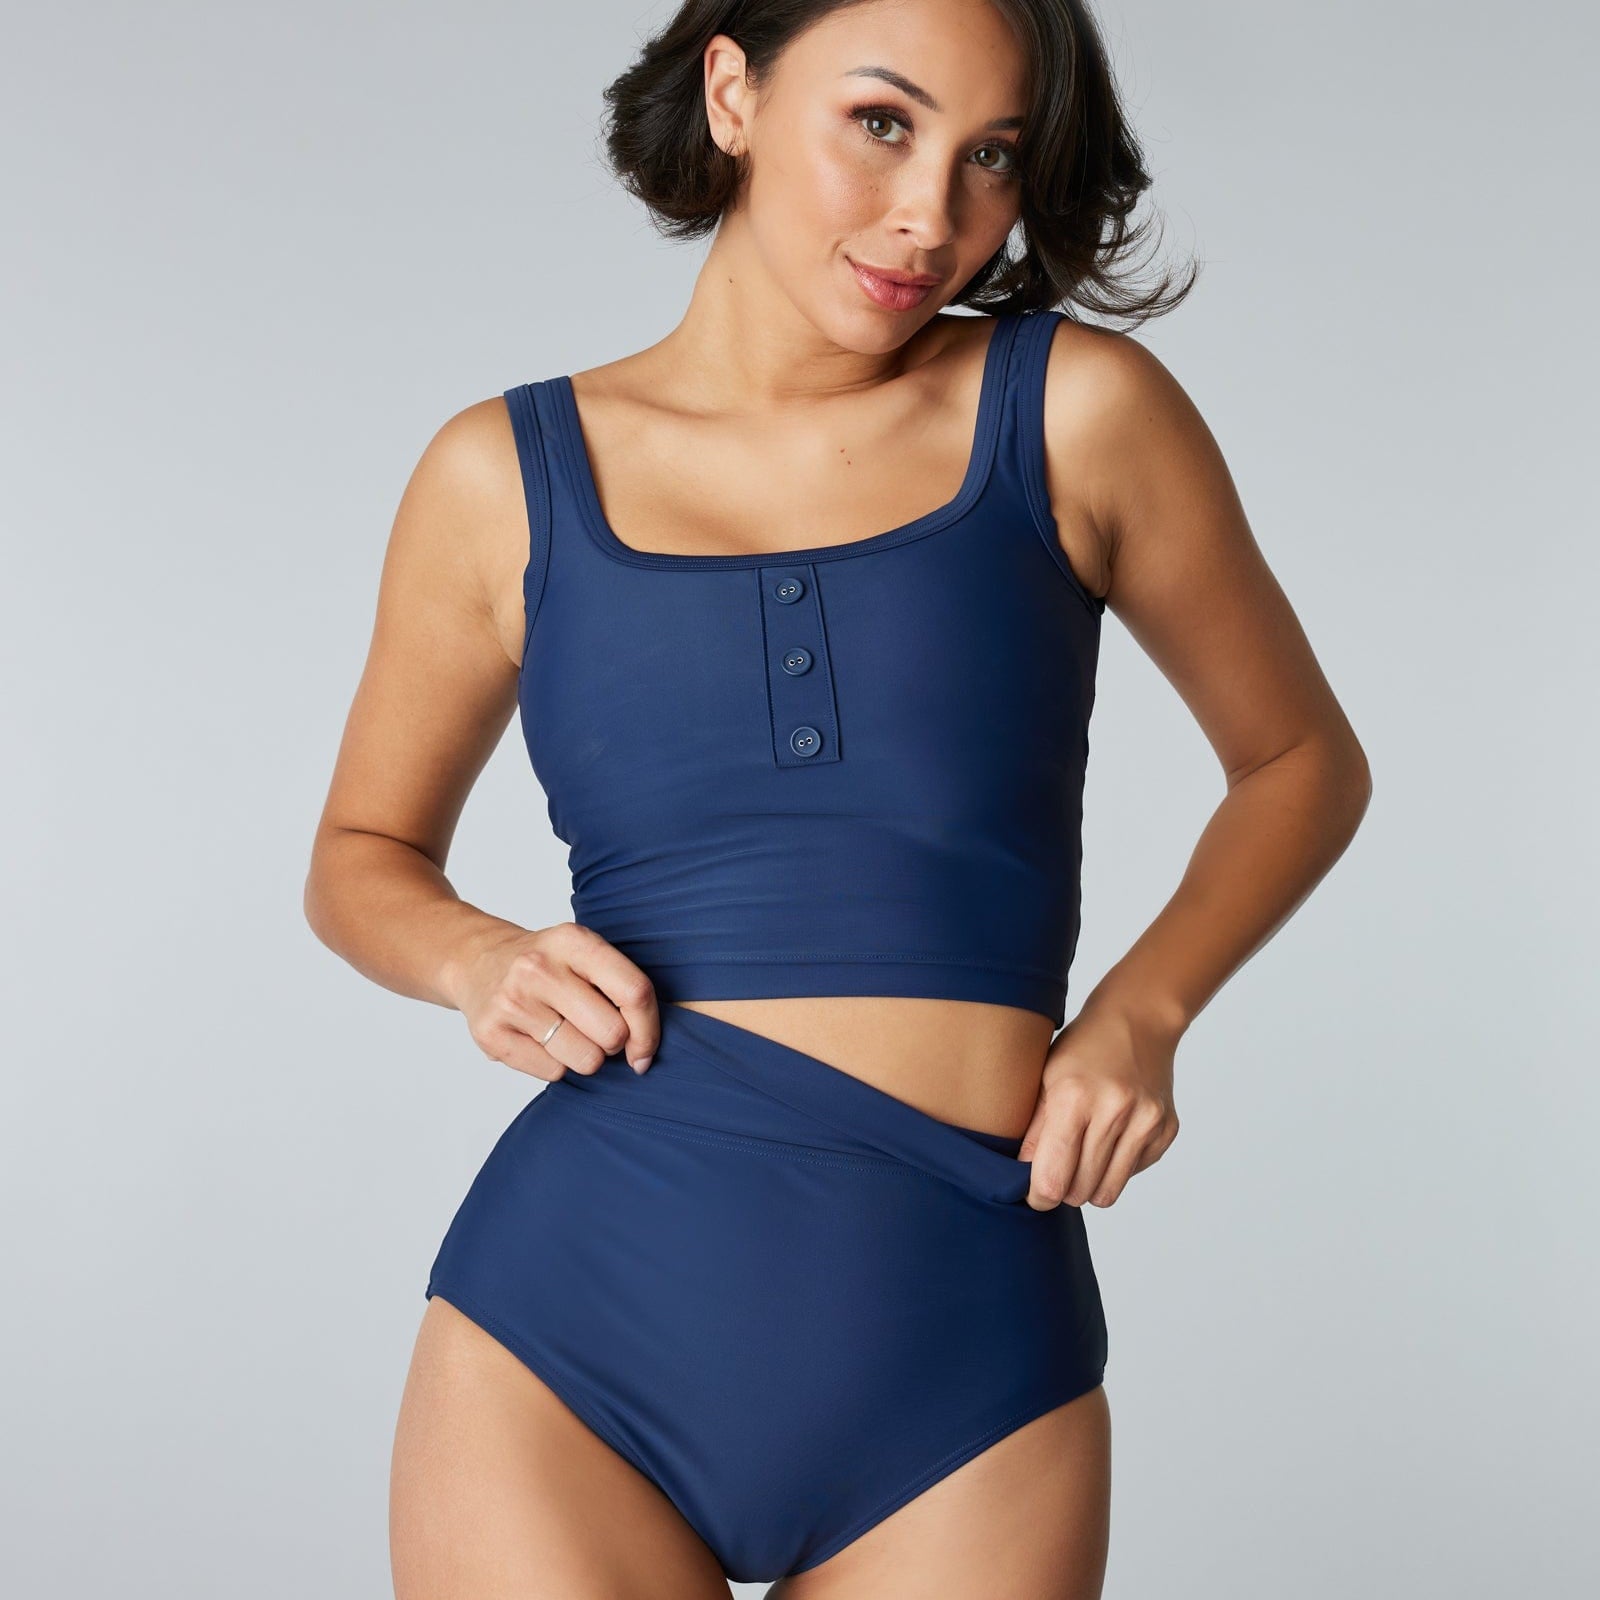 Woman in a two-piece swimsuit with a solid blue top and bottom.